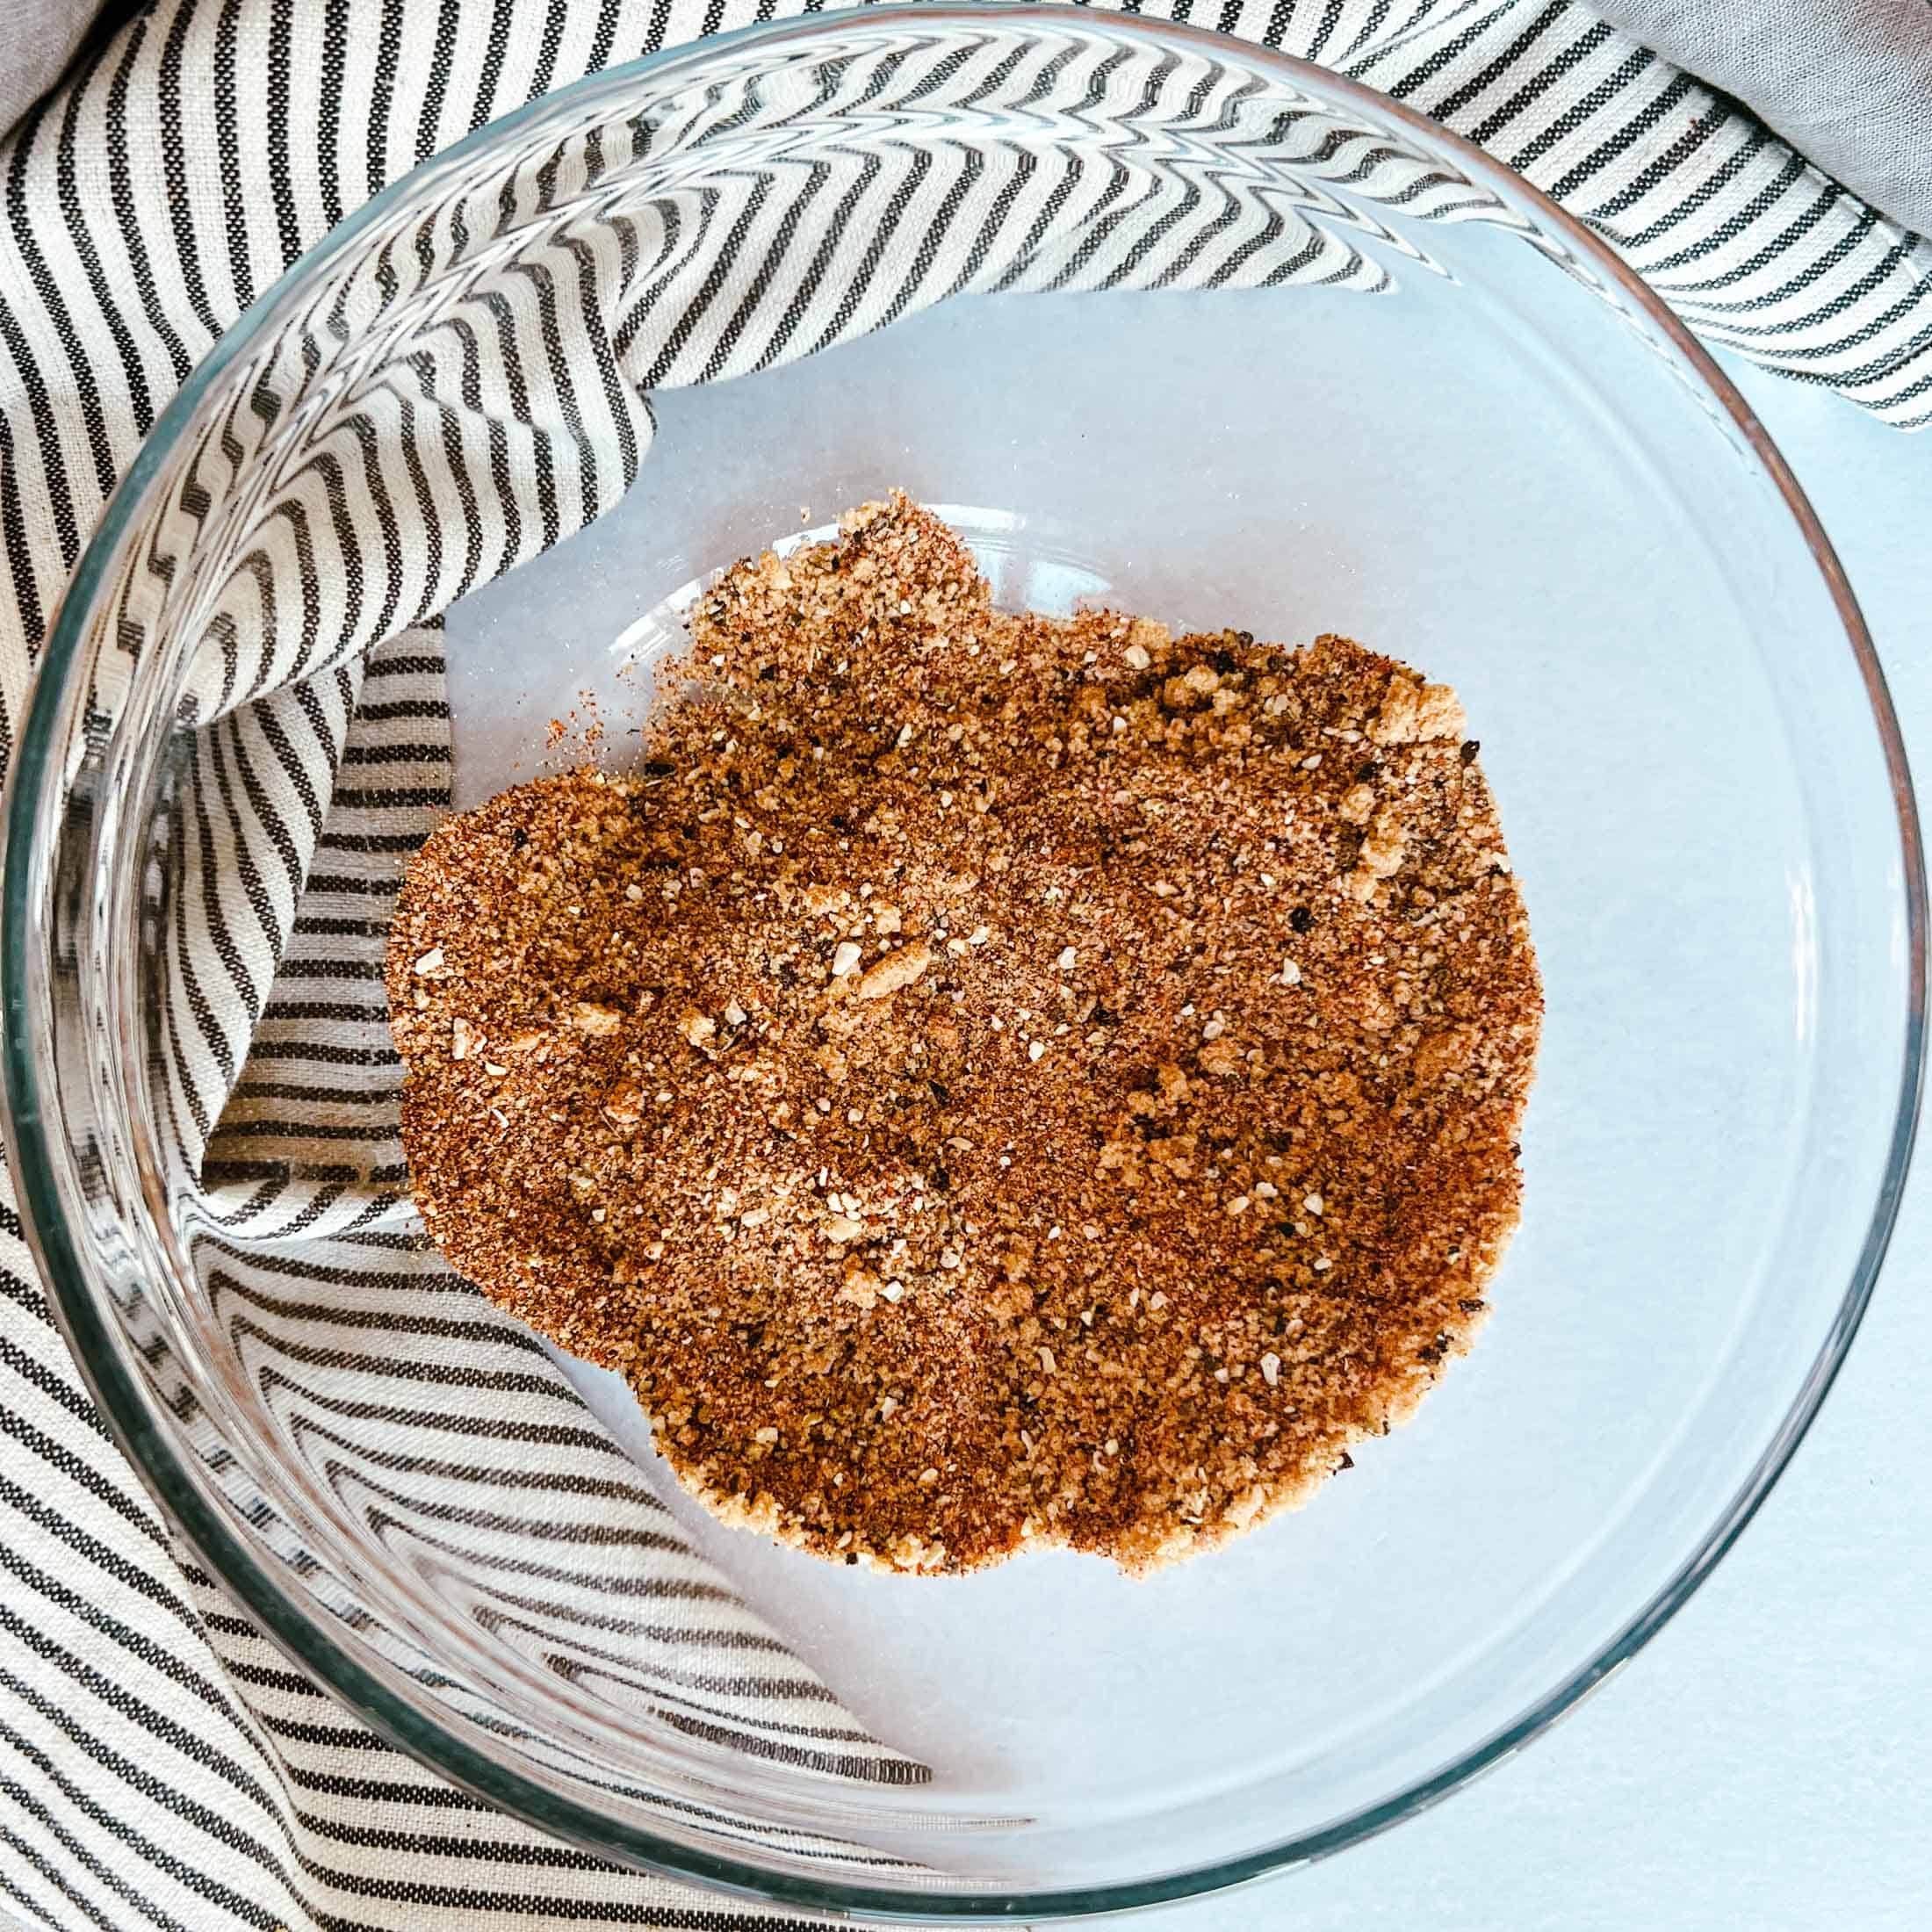 Spices and brown sugar loosely mixed in a glass bowl with a striped napkin in the background.